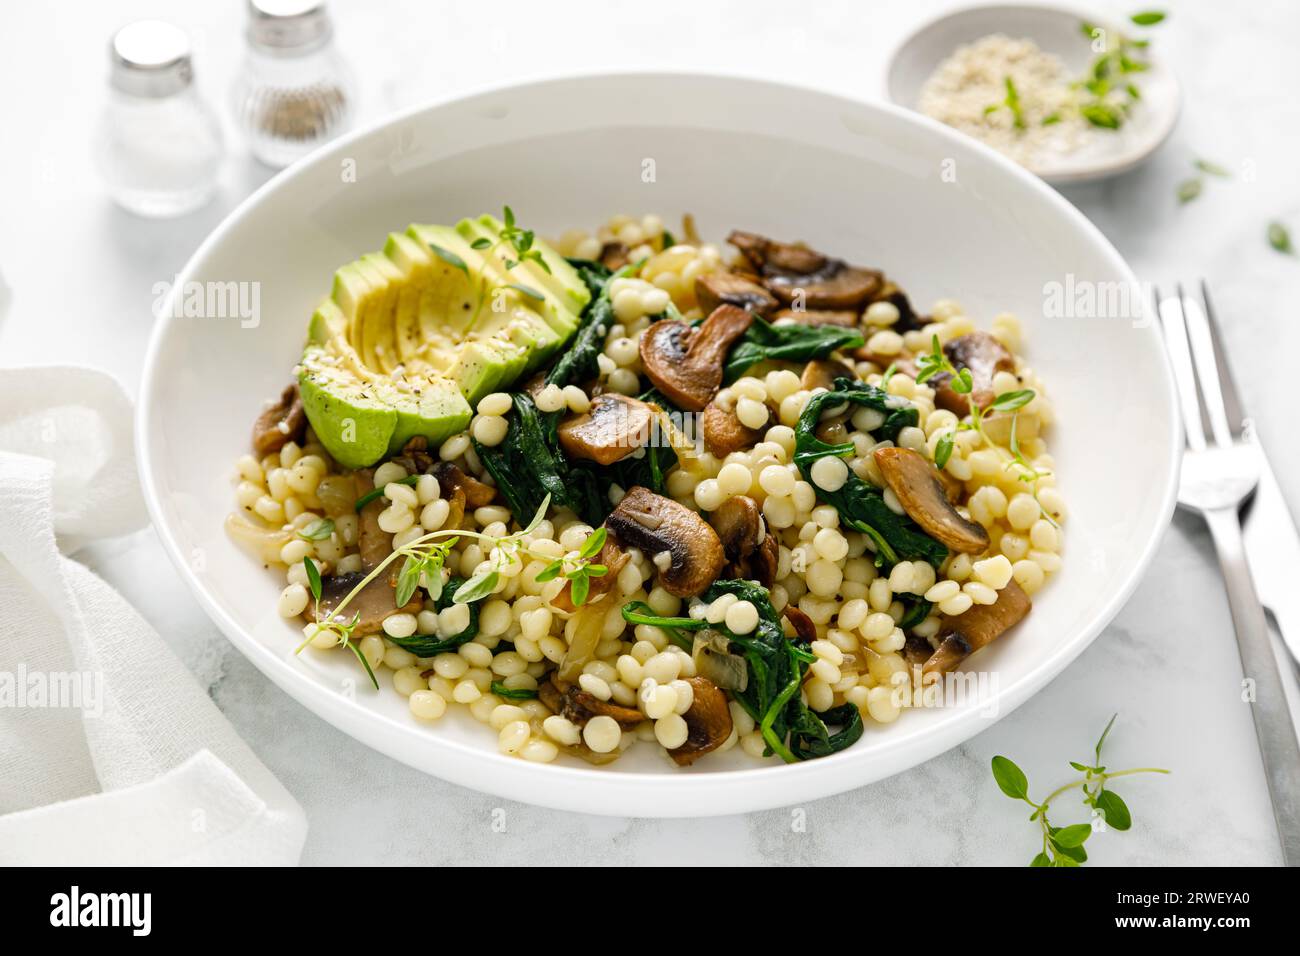 Couscous with avocado, spinach and sauteed champignon mushrooms with onion Stock Photo